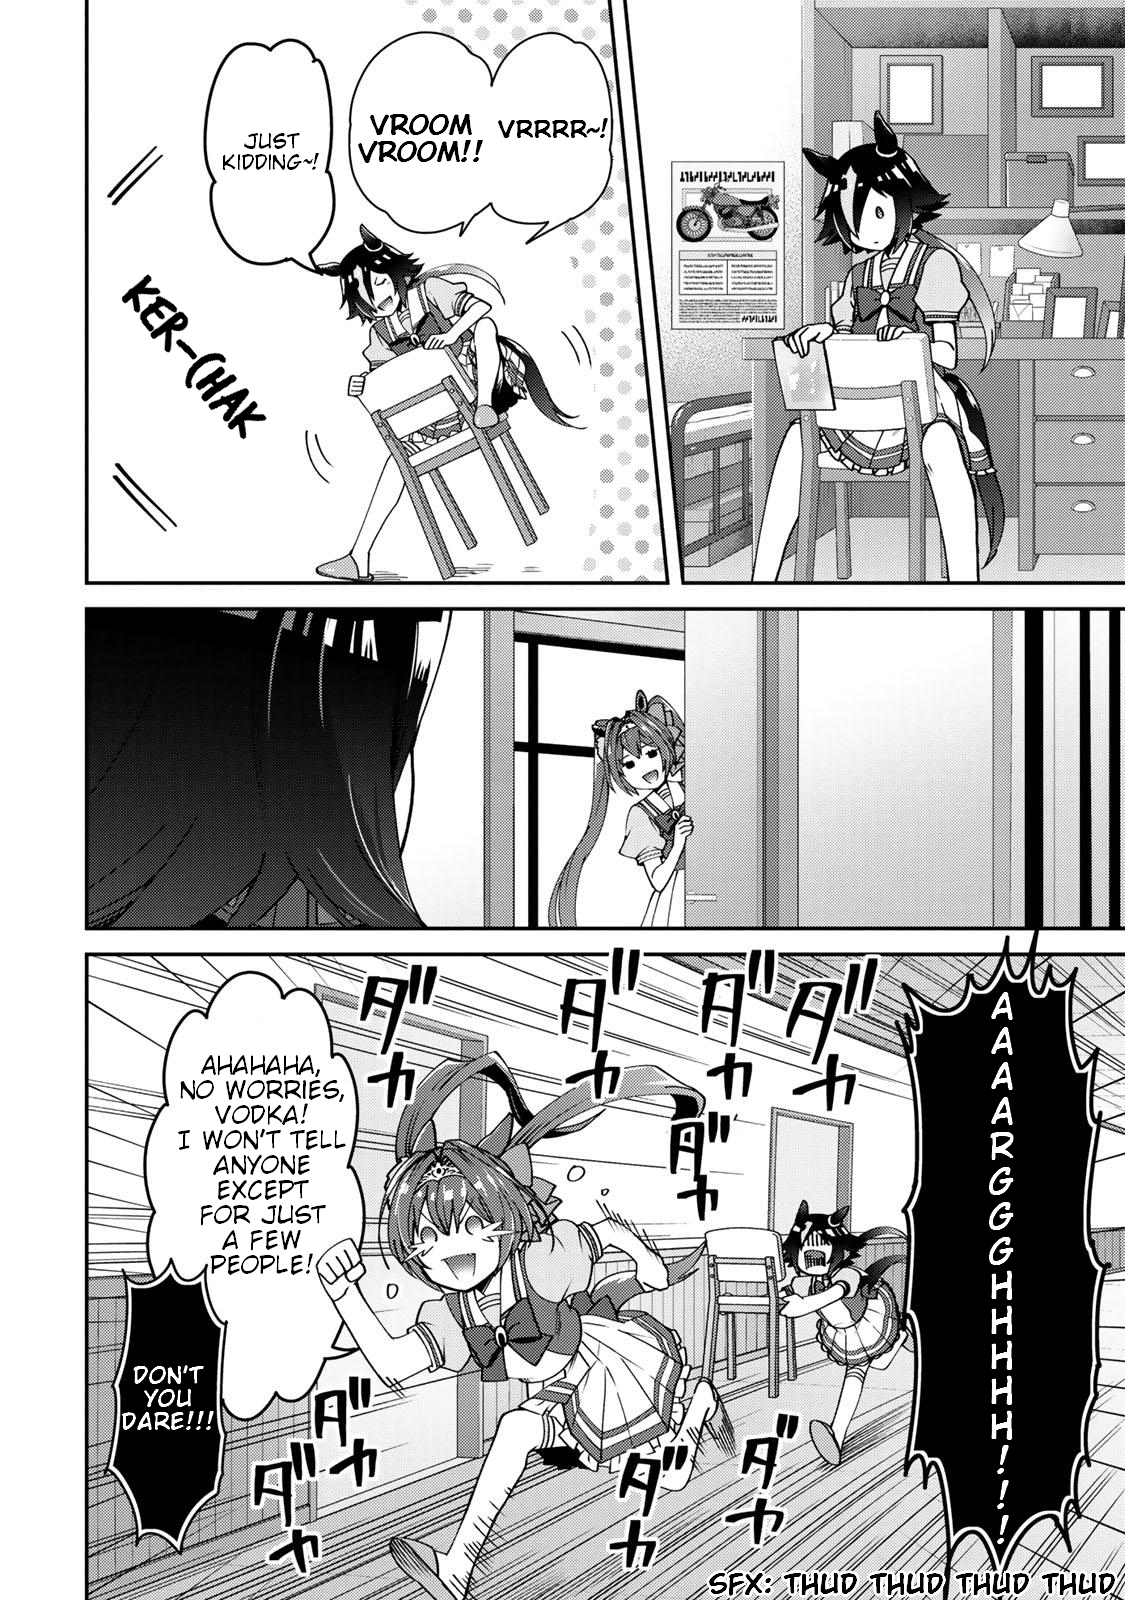 Starting Gate! Uma Musume Pretty Derby Vol.2 Chapter 14.5: Vodka Special - Picture 2